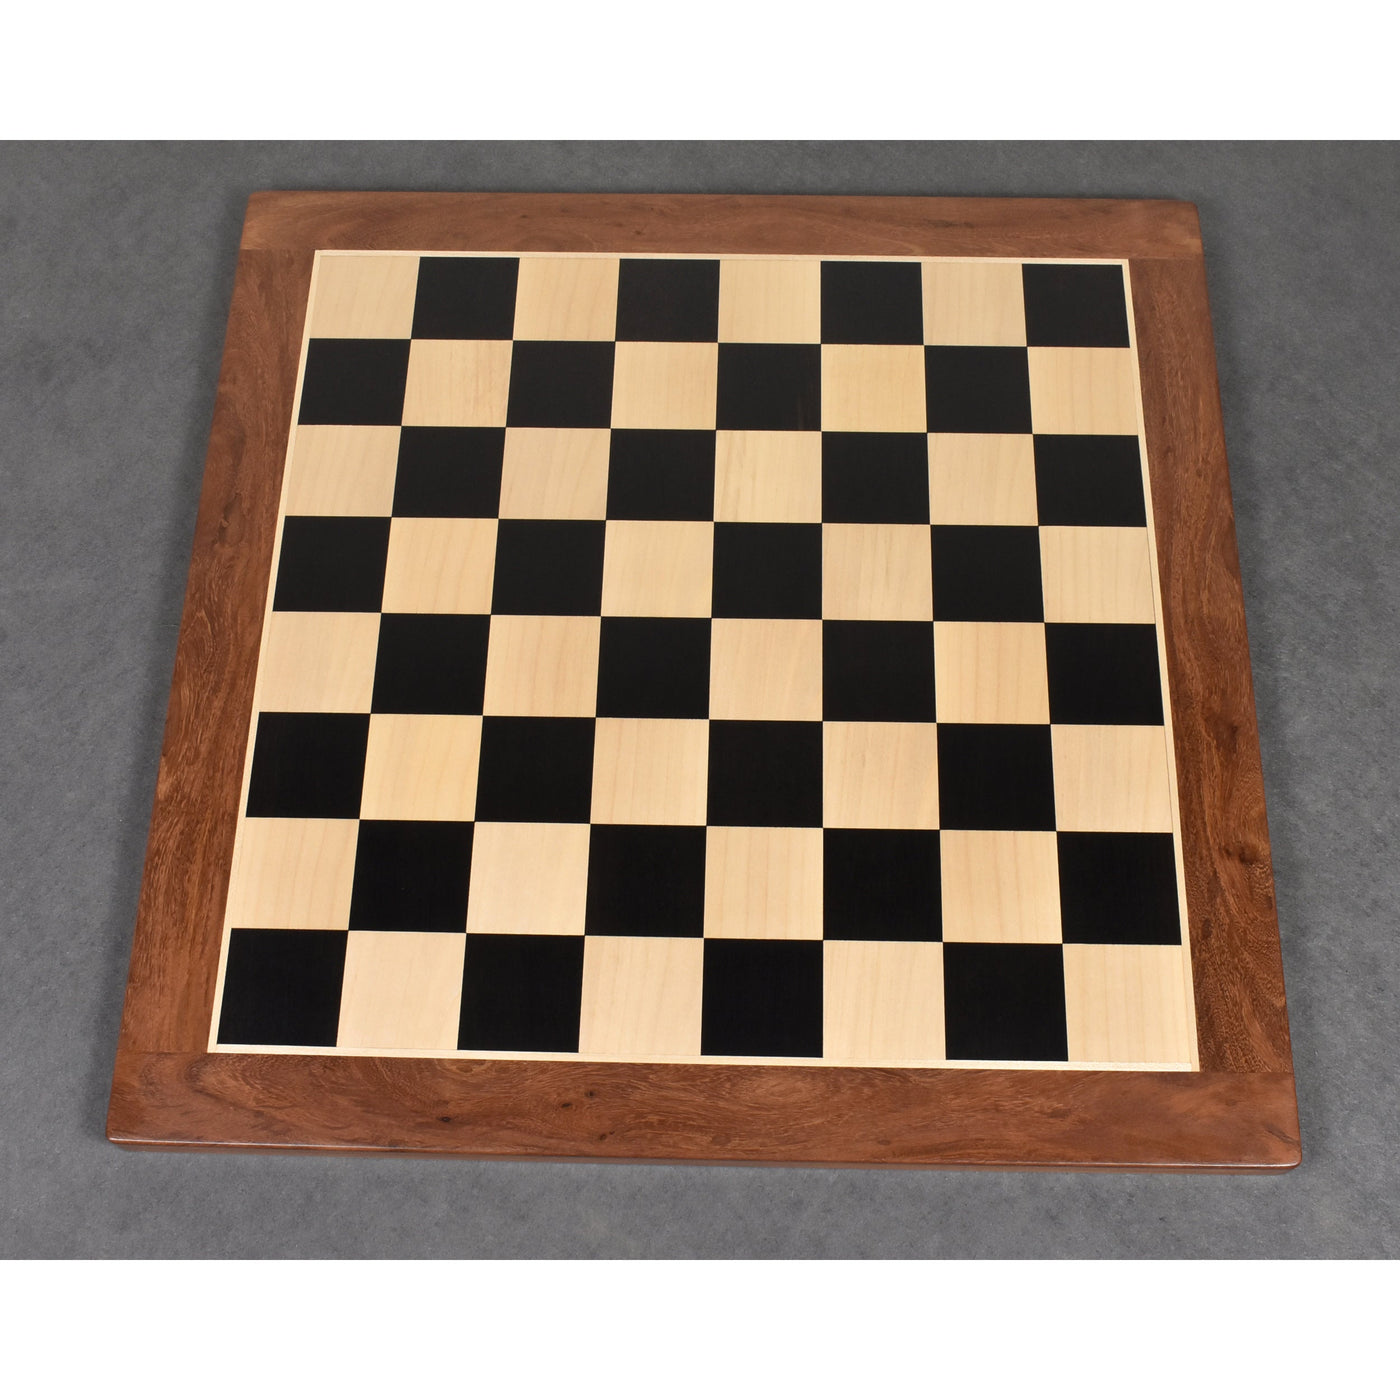 4.1" Pro Staunton Black & White Lacquered Wooden Chess Pieces with 23" Ebony & Maple Wood Chessboard and Leatherette Coffer Storage Box